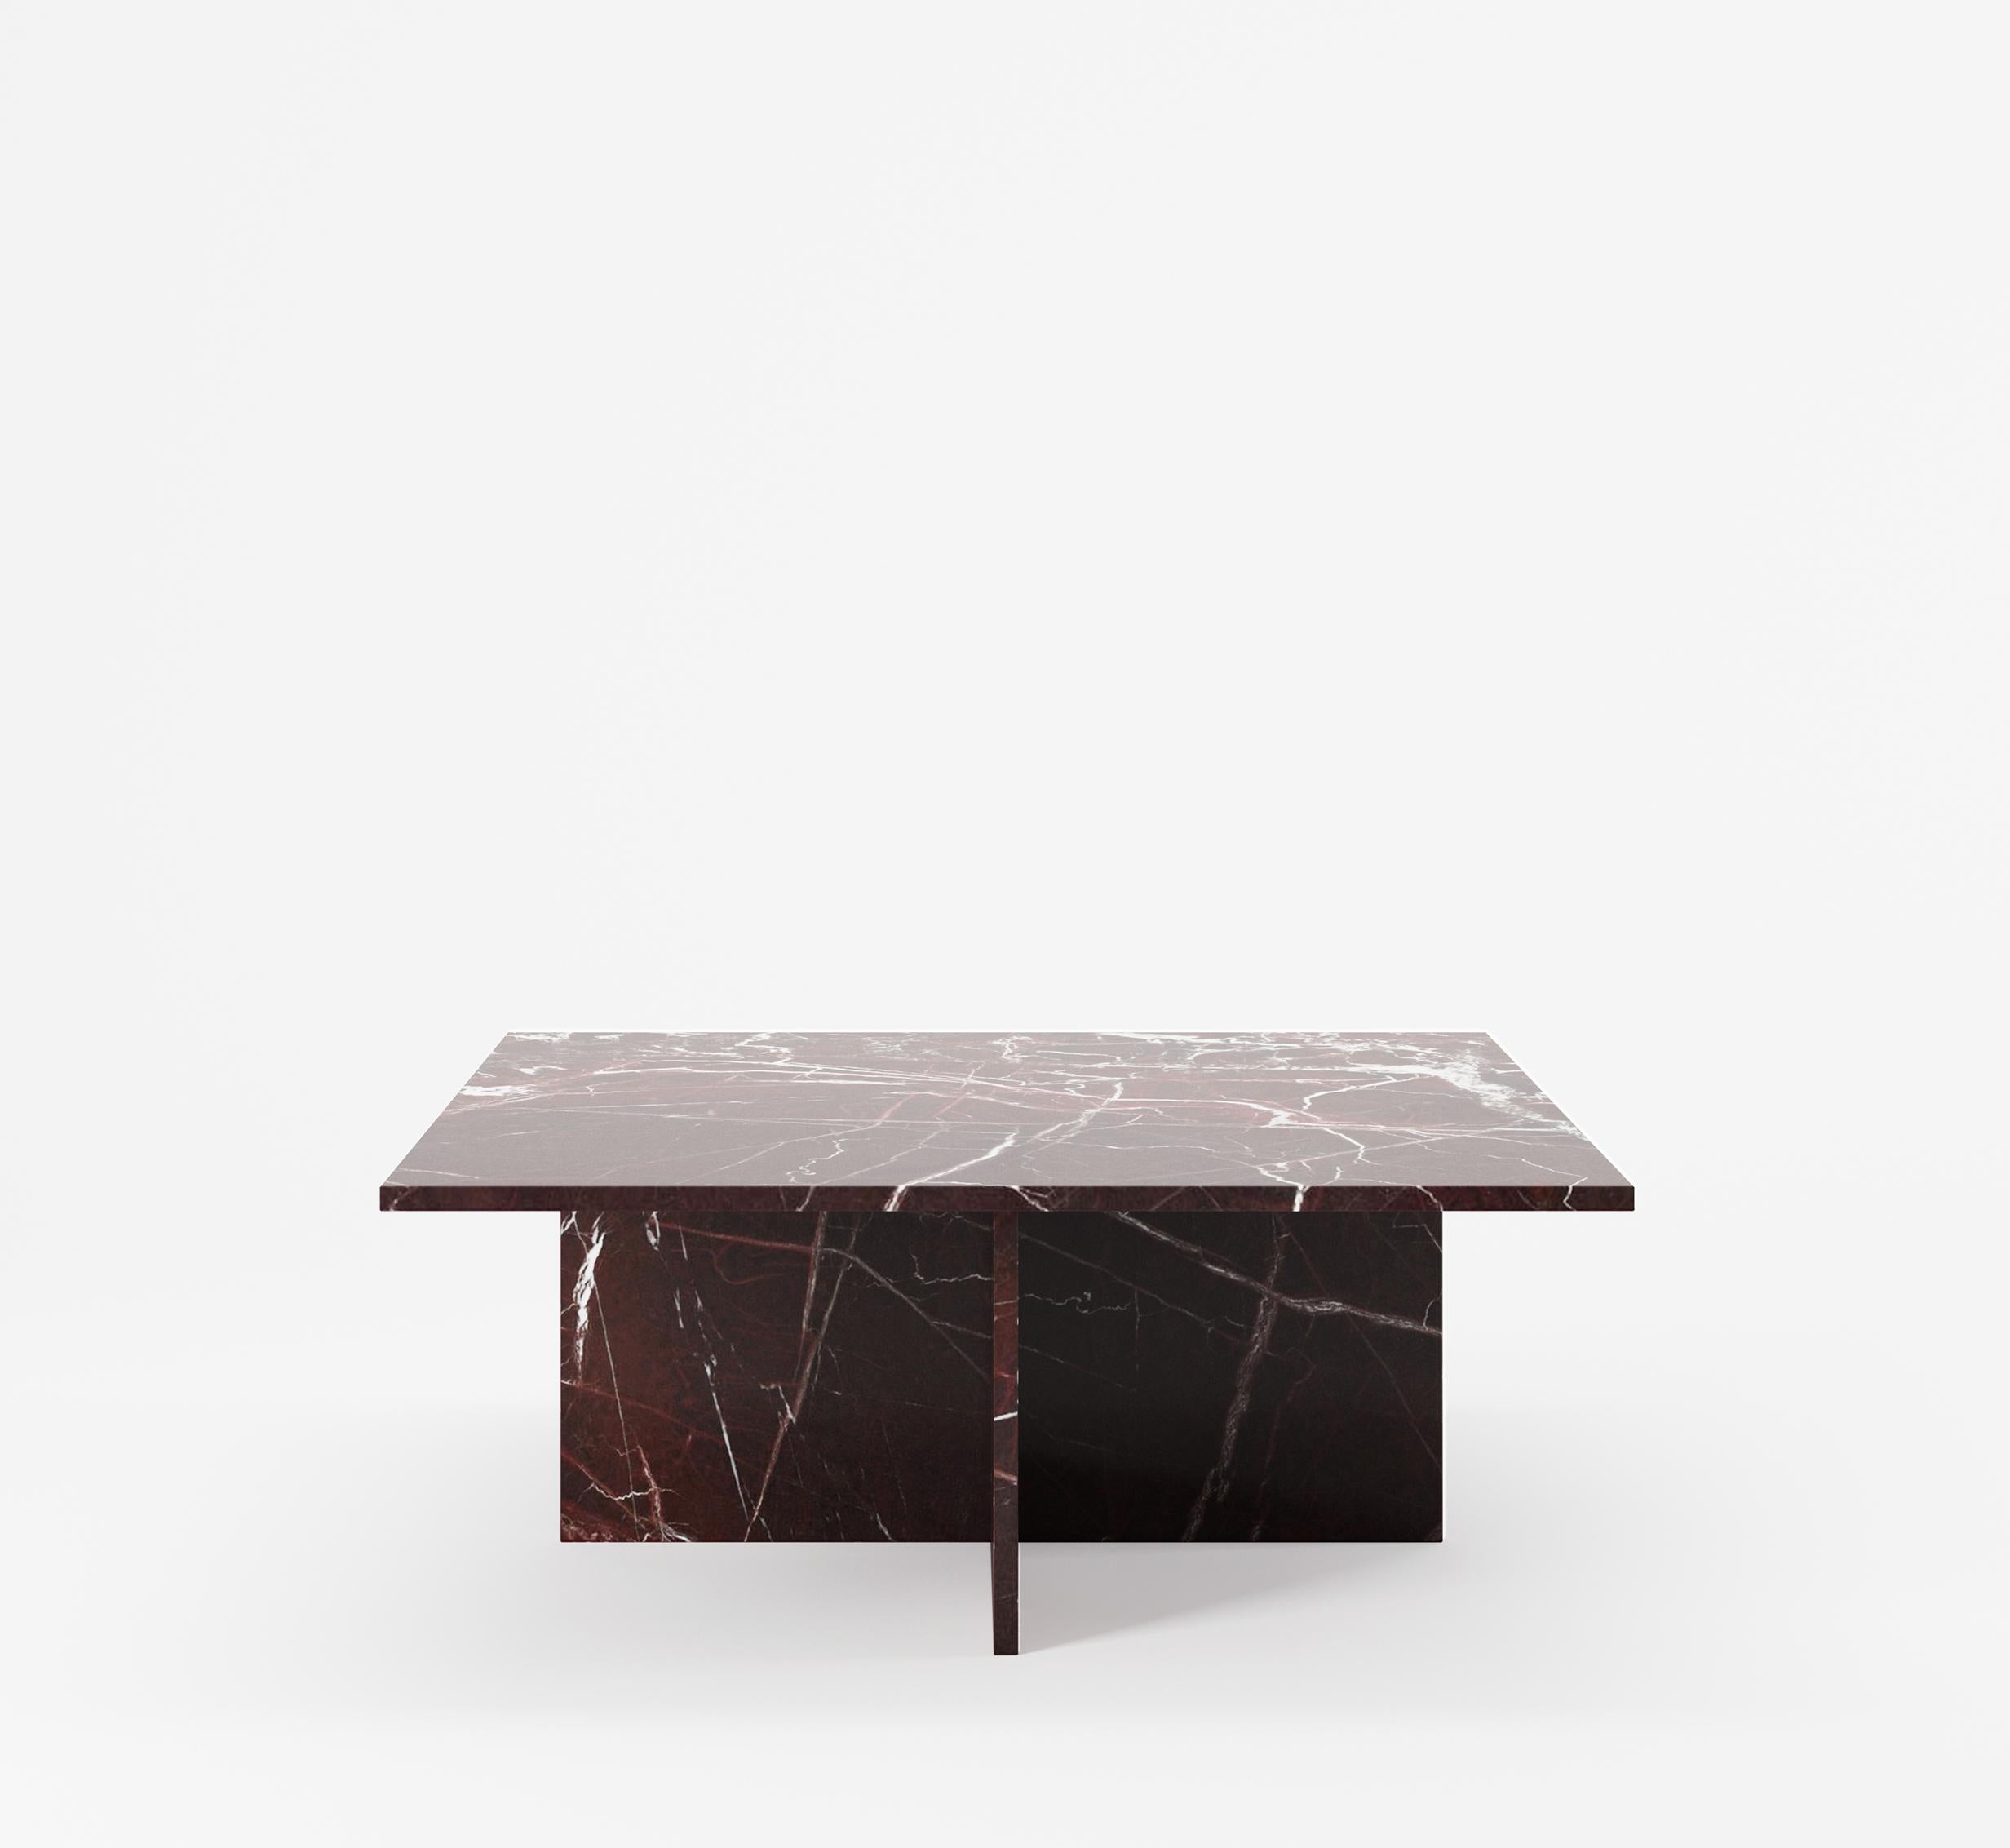 A design somewhere between design and art, the Vondel coffee table has a reassuring solidity of form, which commands and fills a room. A simple, yet strong shape gives it a versatile aesthetic and allows it the flexibility to work well with multiple